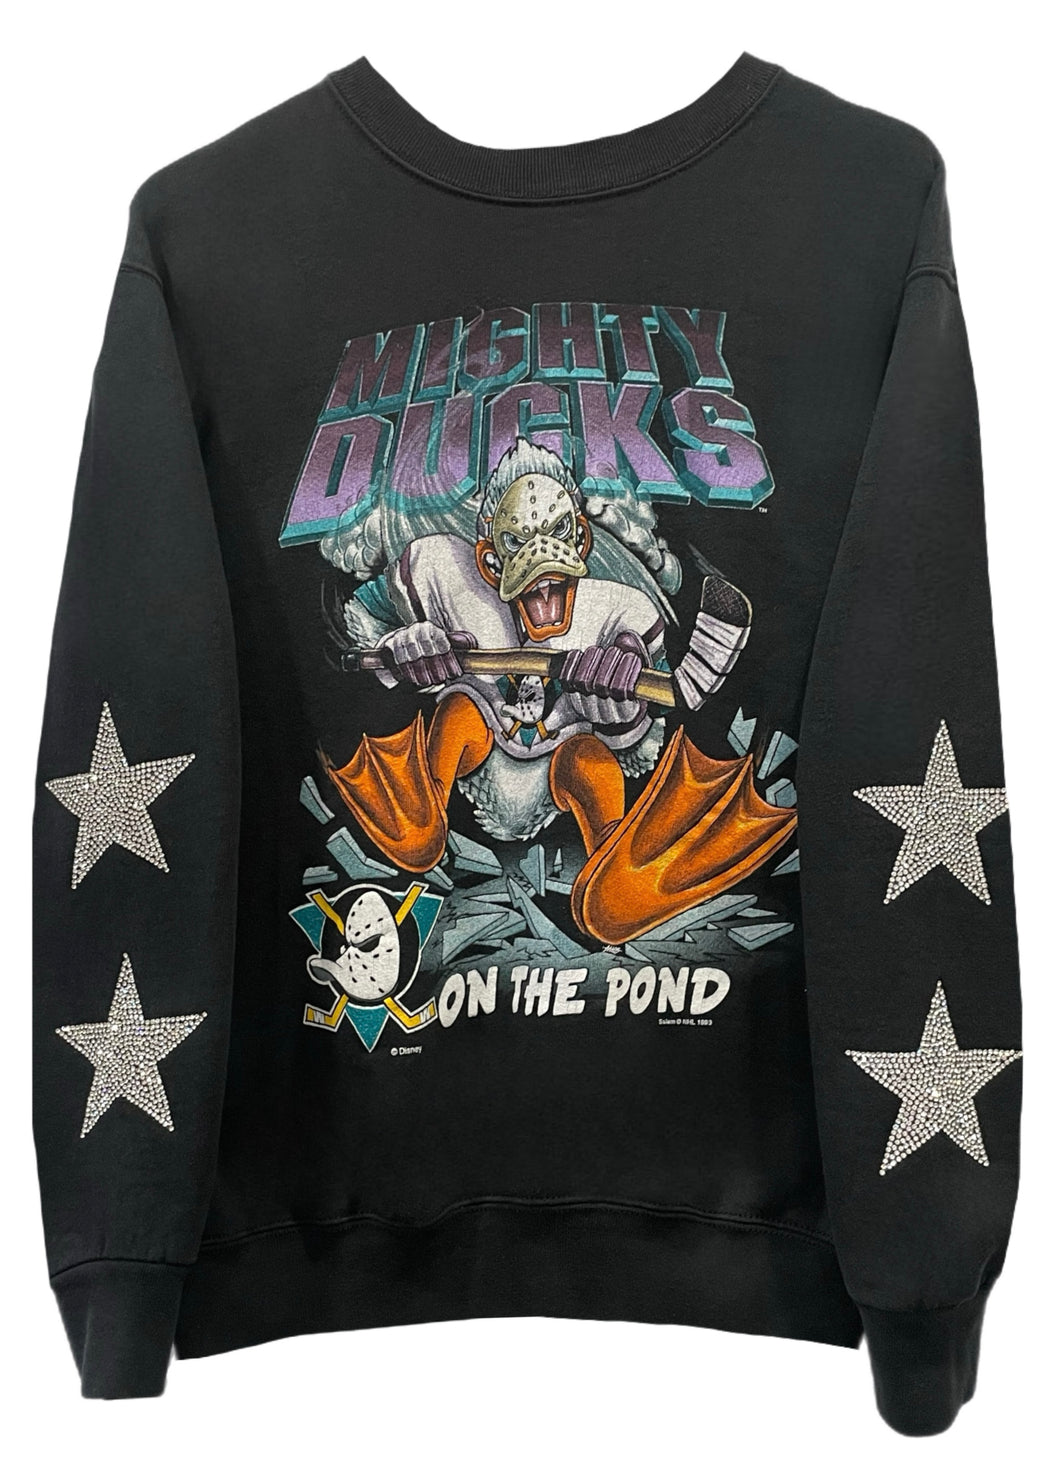 Anaheim Ducks, NHL One of a KIND Vintage “Mighty Ducks” Sweatshirt with Crystal Star Design - Size: Small